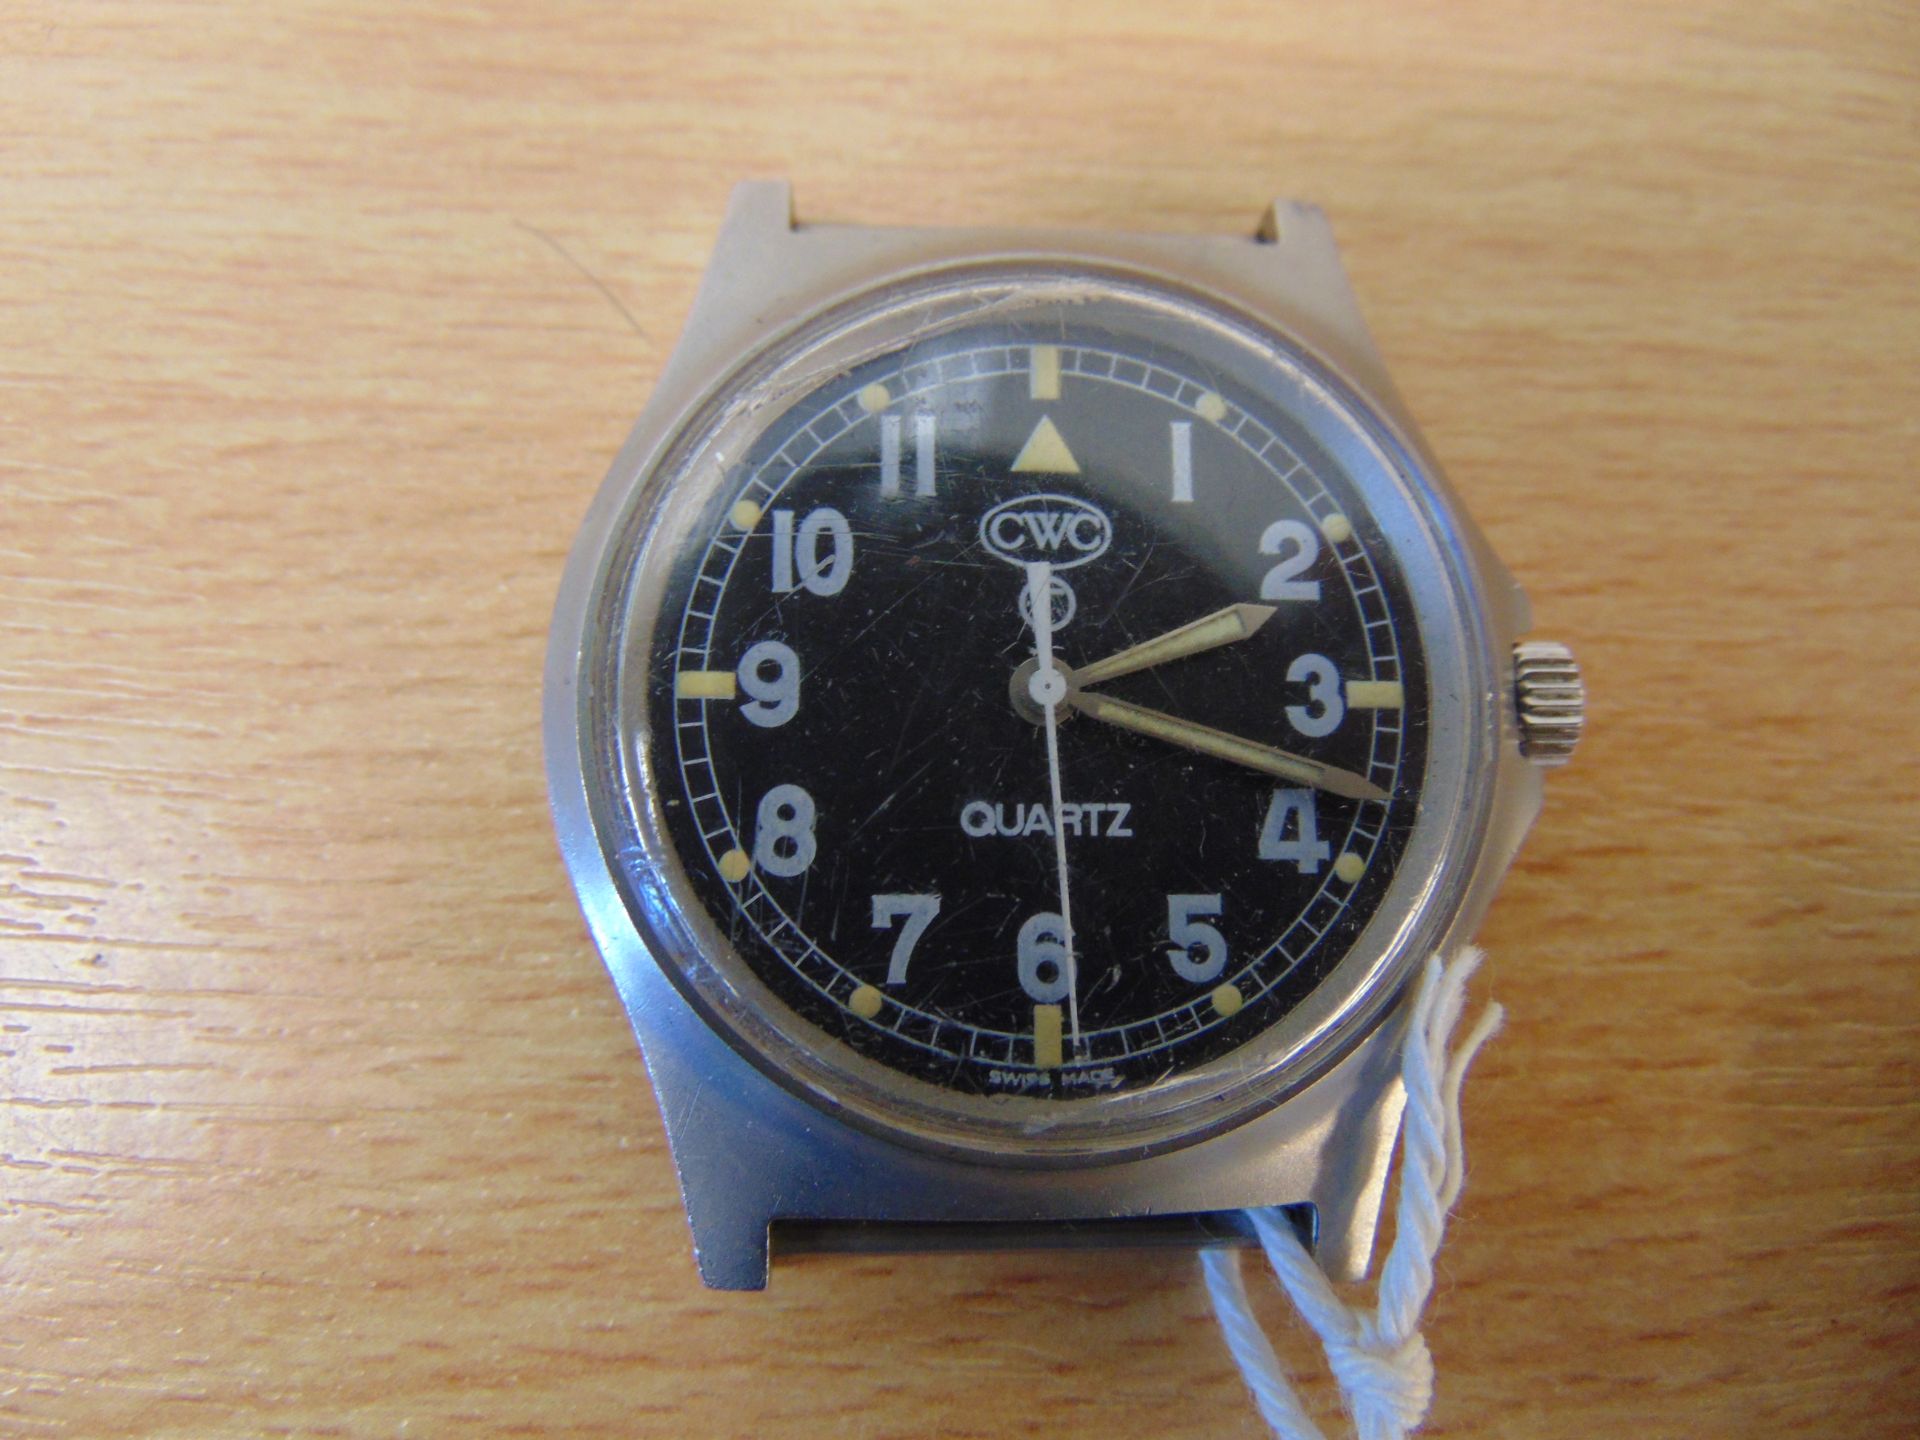 CWC 0555 R.Marines service watch with Nato Marks and broad arrow, small chip in glass, Date 1995